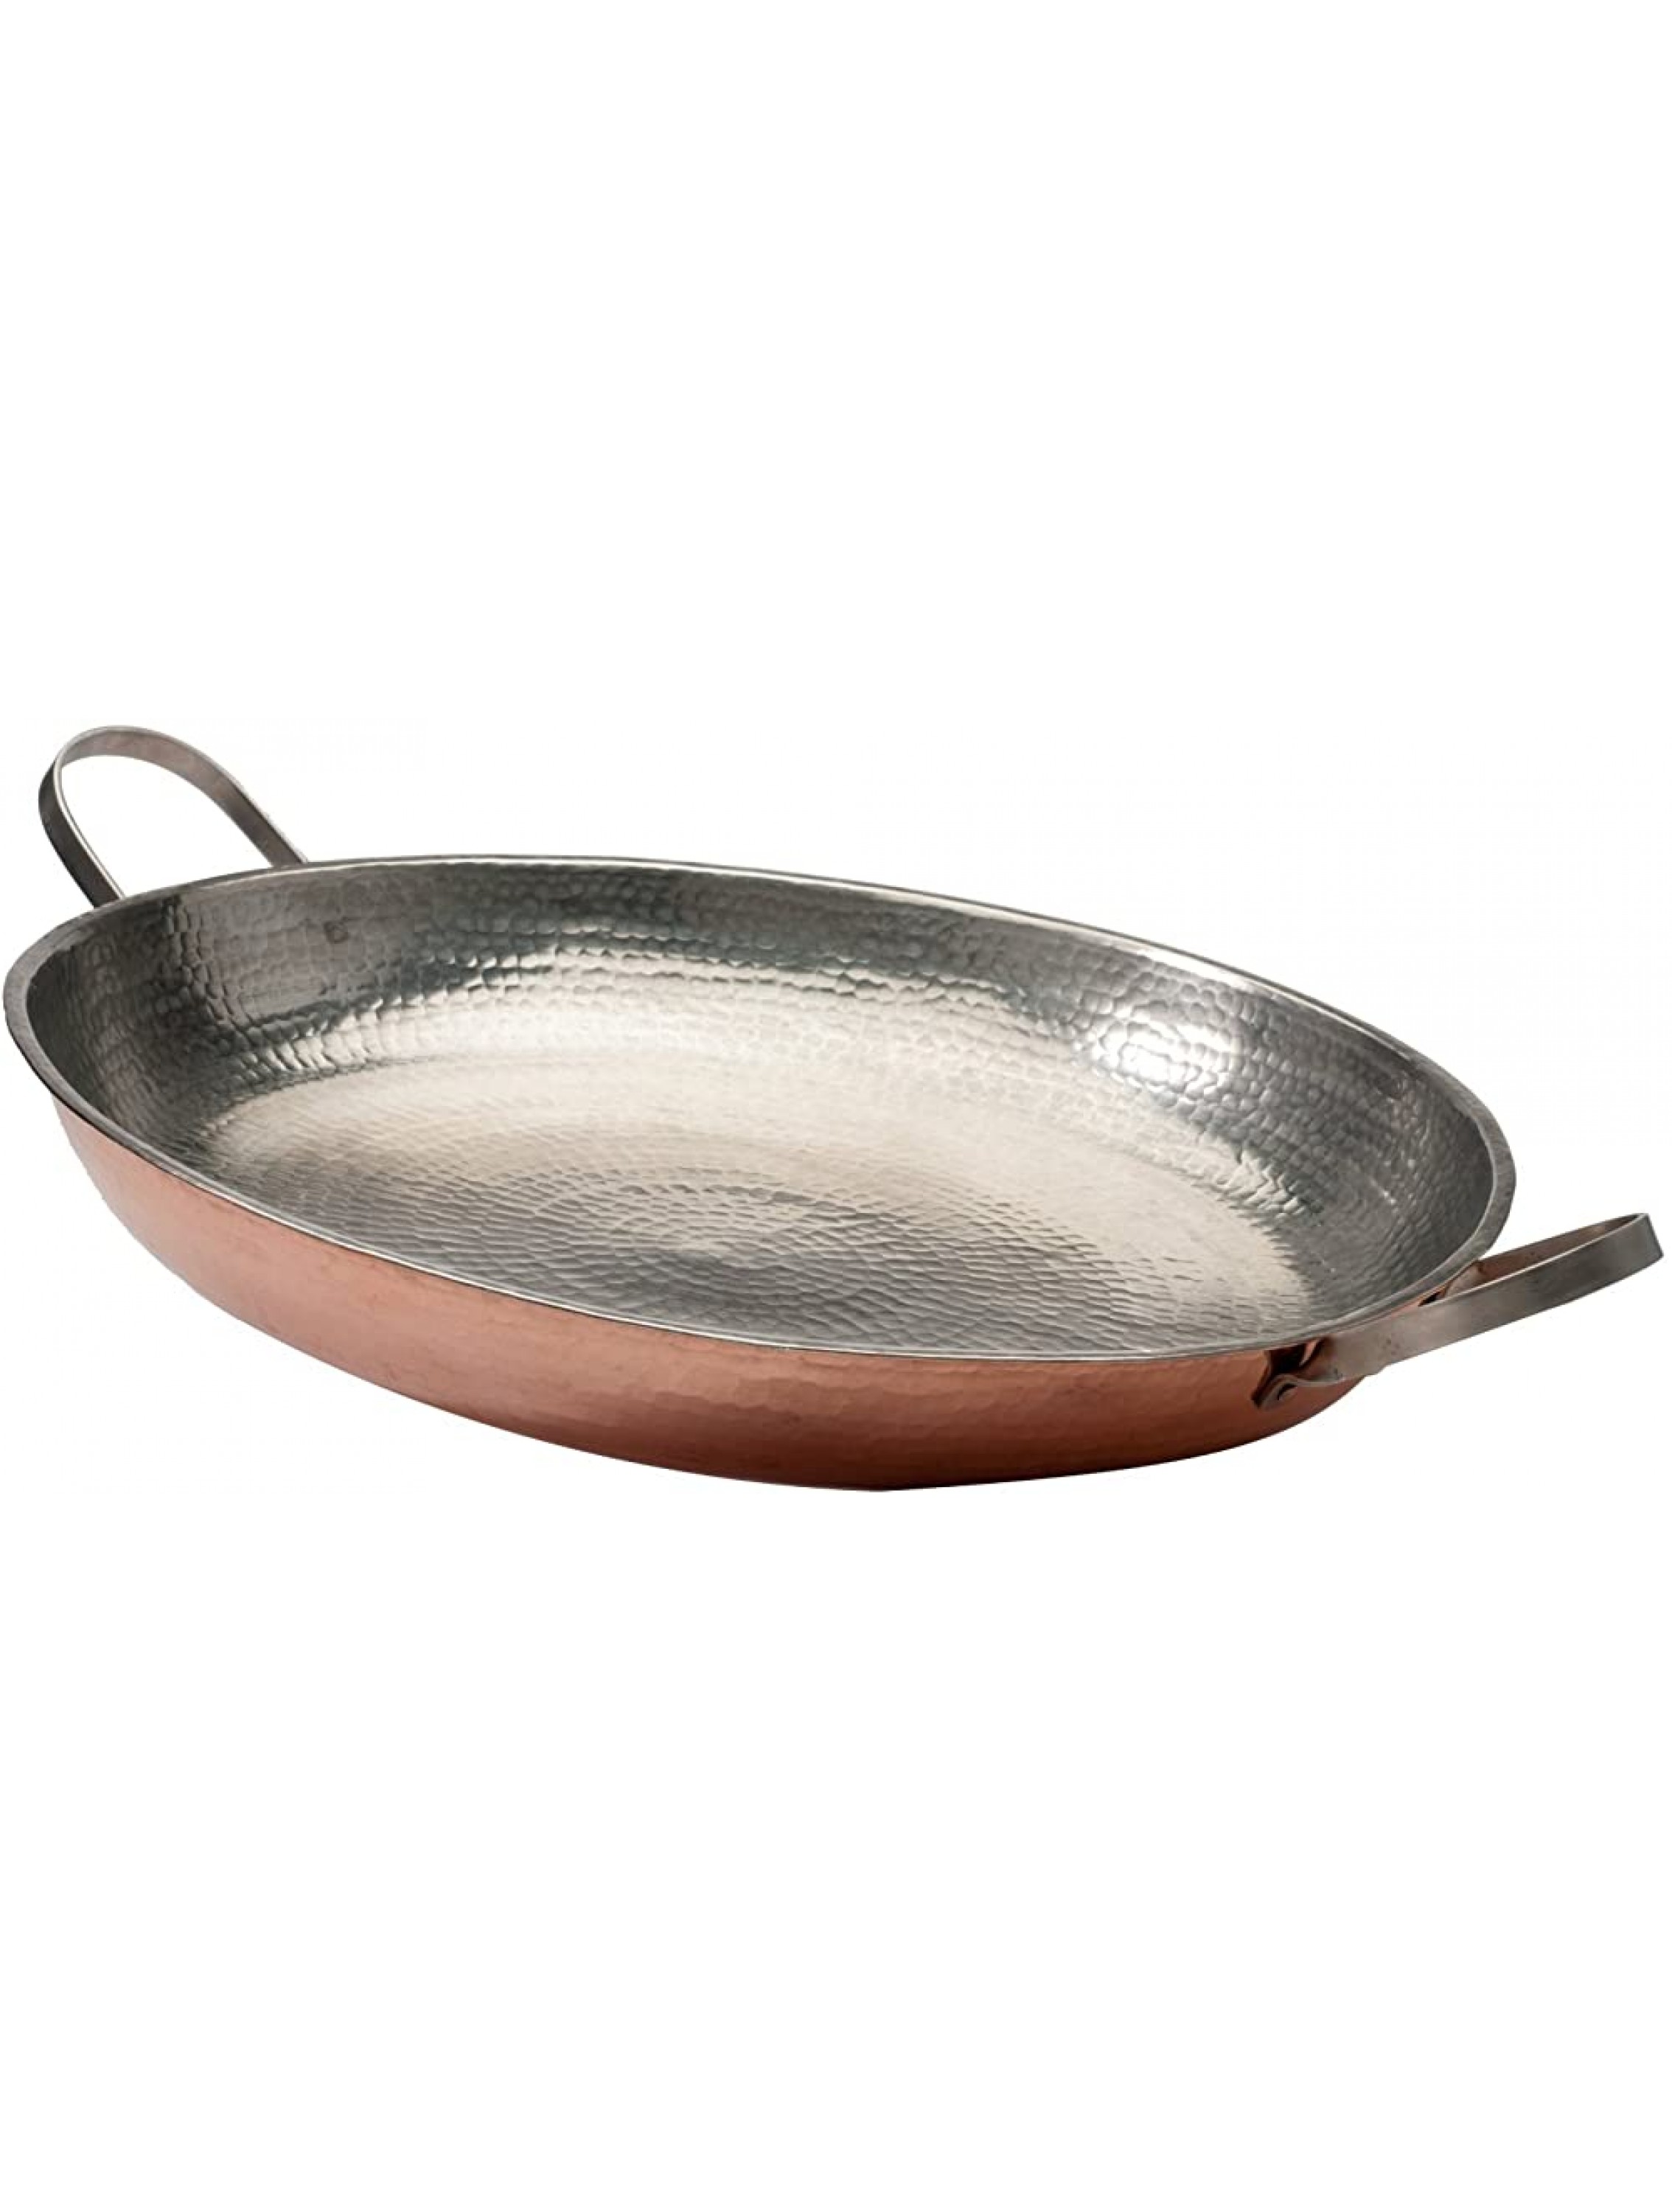 Sertodo Copper Alicante Paella Cooking Pan with Stainless Steel Handles Hand Hammered 14 Gauge 100% Pure Copper 18 - BXN1LOS30